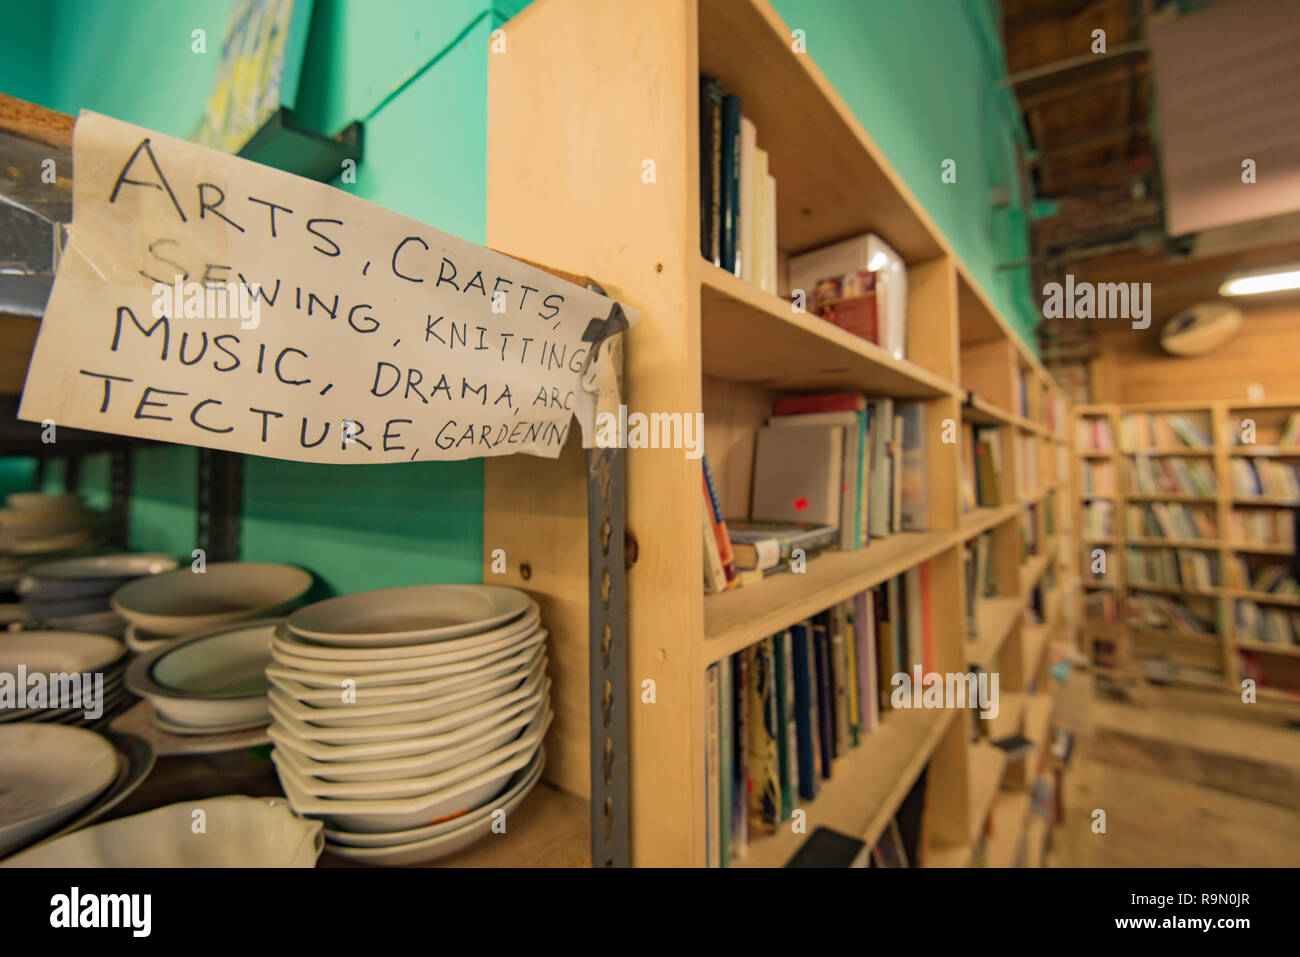 A hand written sign above books and crockery (plates) stacked on shelves in a Thrift Store in the Mission district of San Francisco, California, USA Stock Photo